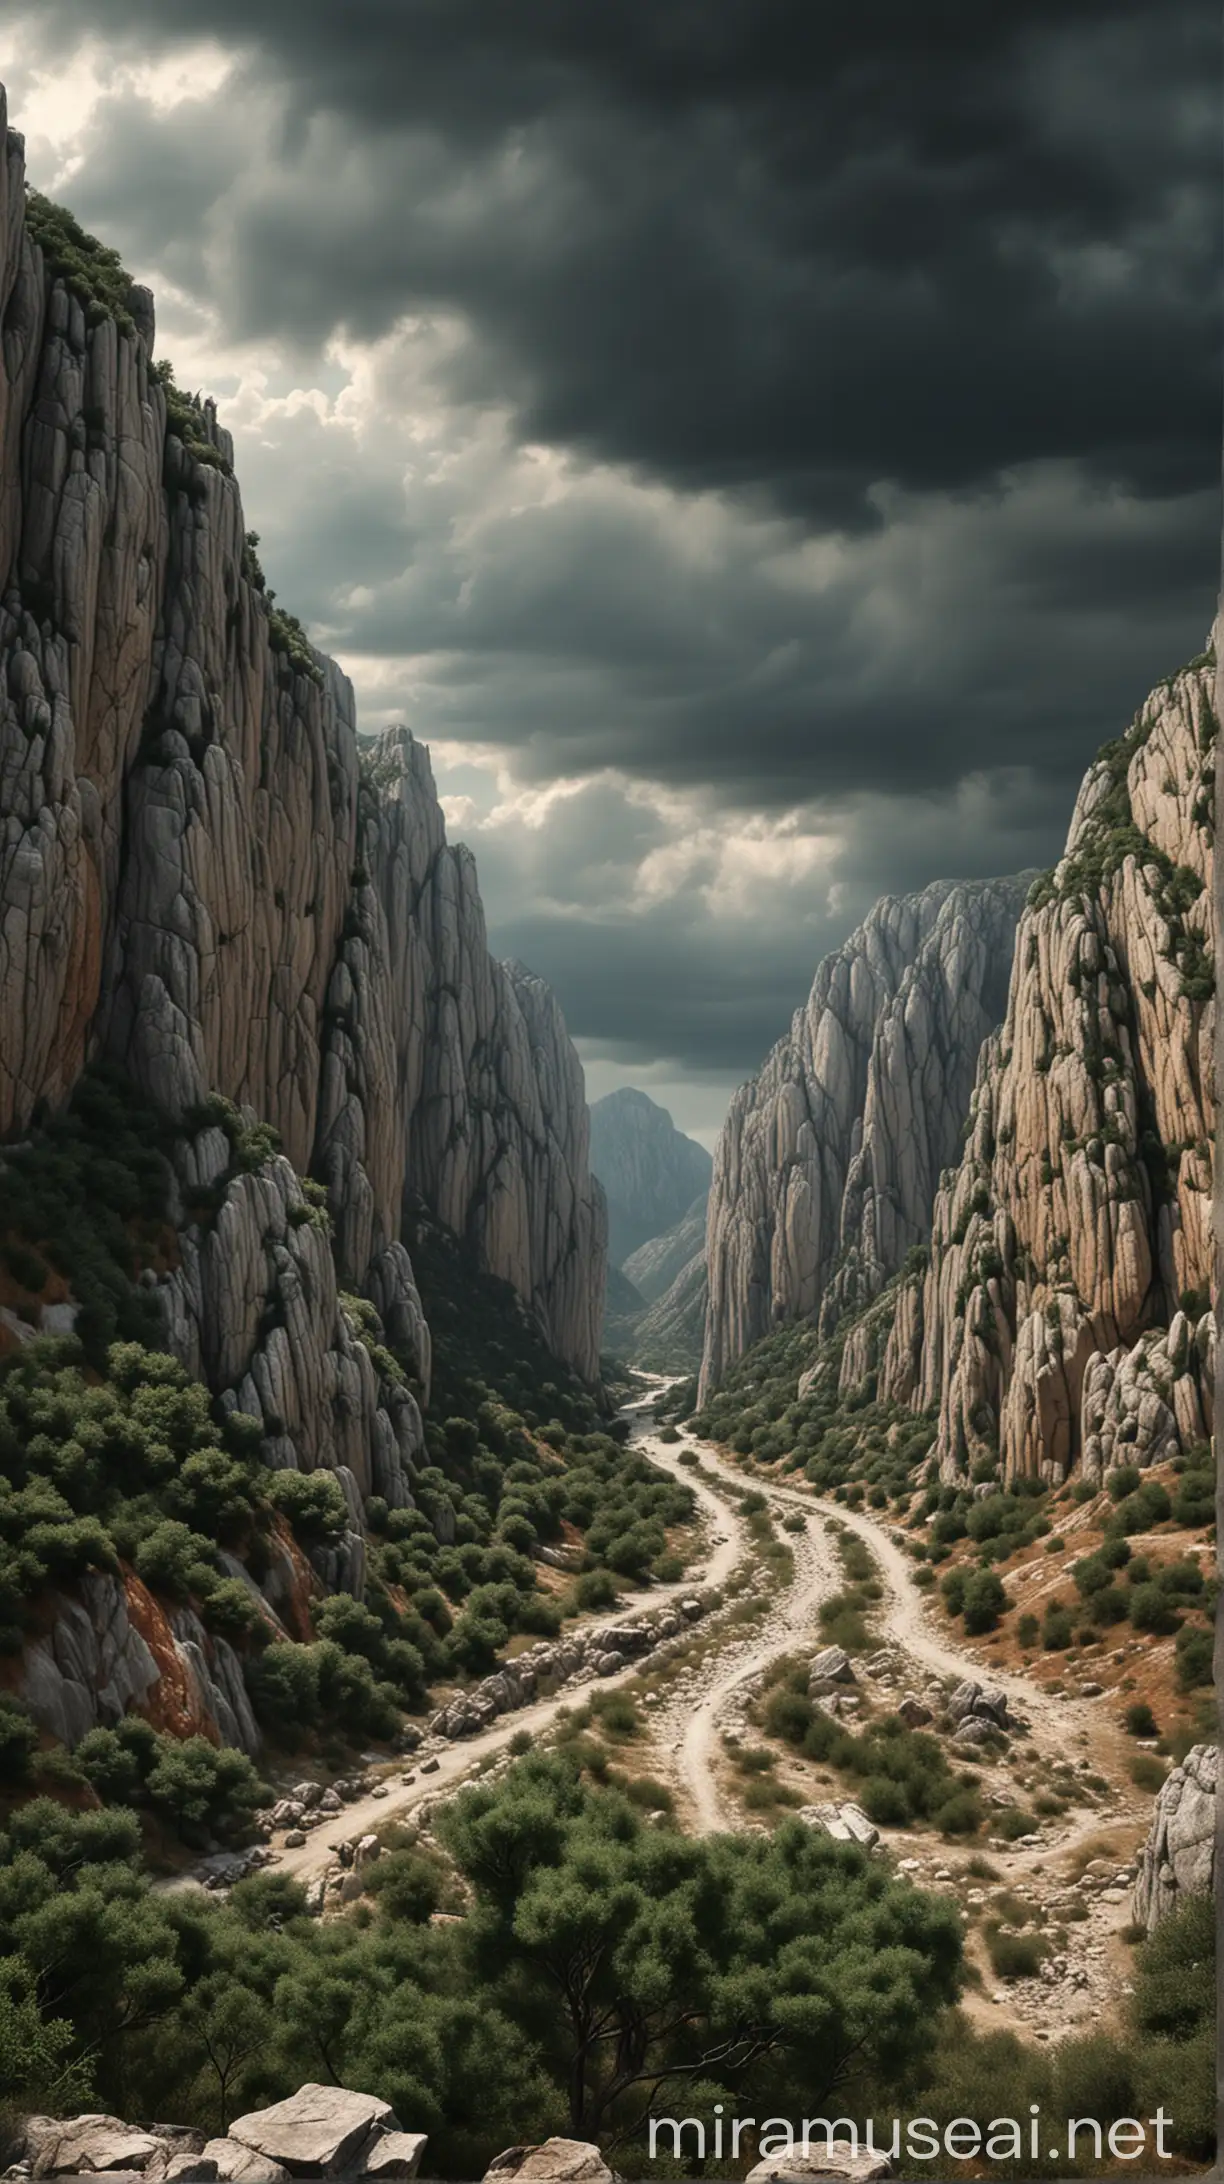 A panoramic view of the rugged landscape of Thermopylae, with cliffs towering in the background and ominous clouds overhead. hyper realistic